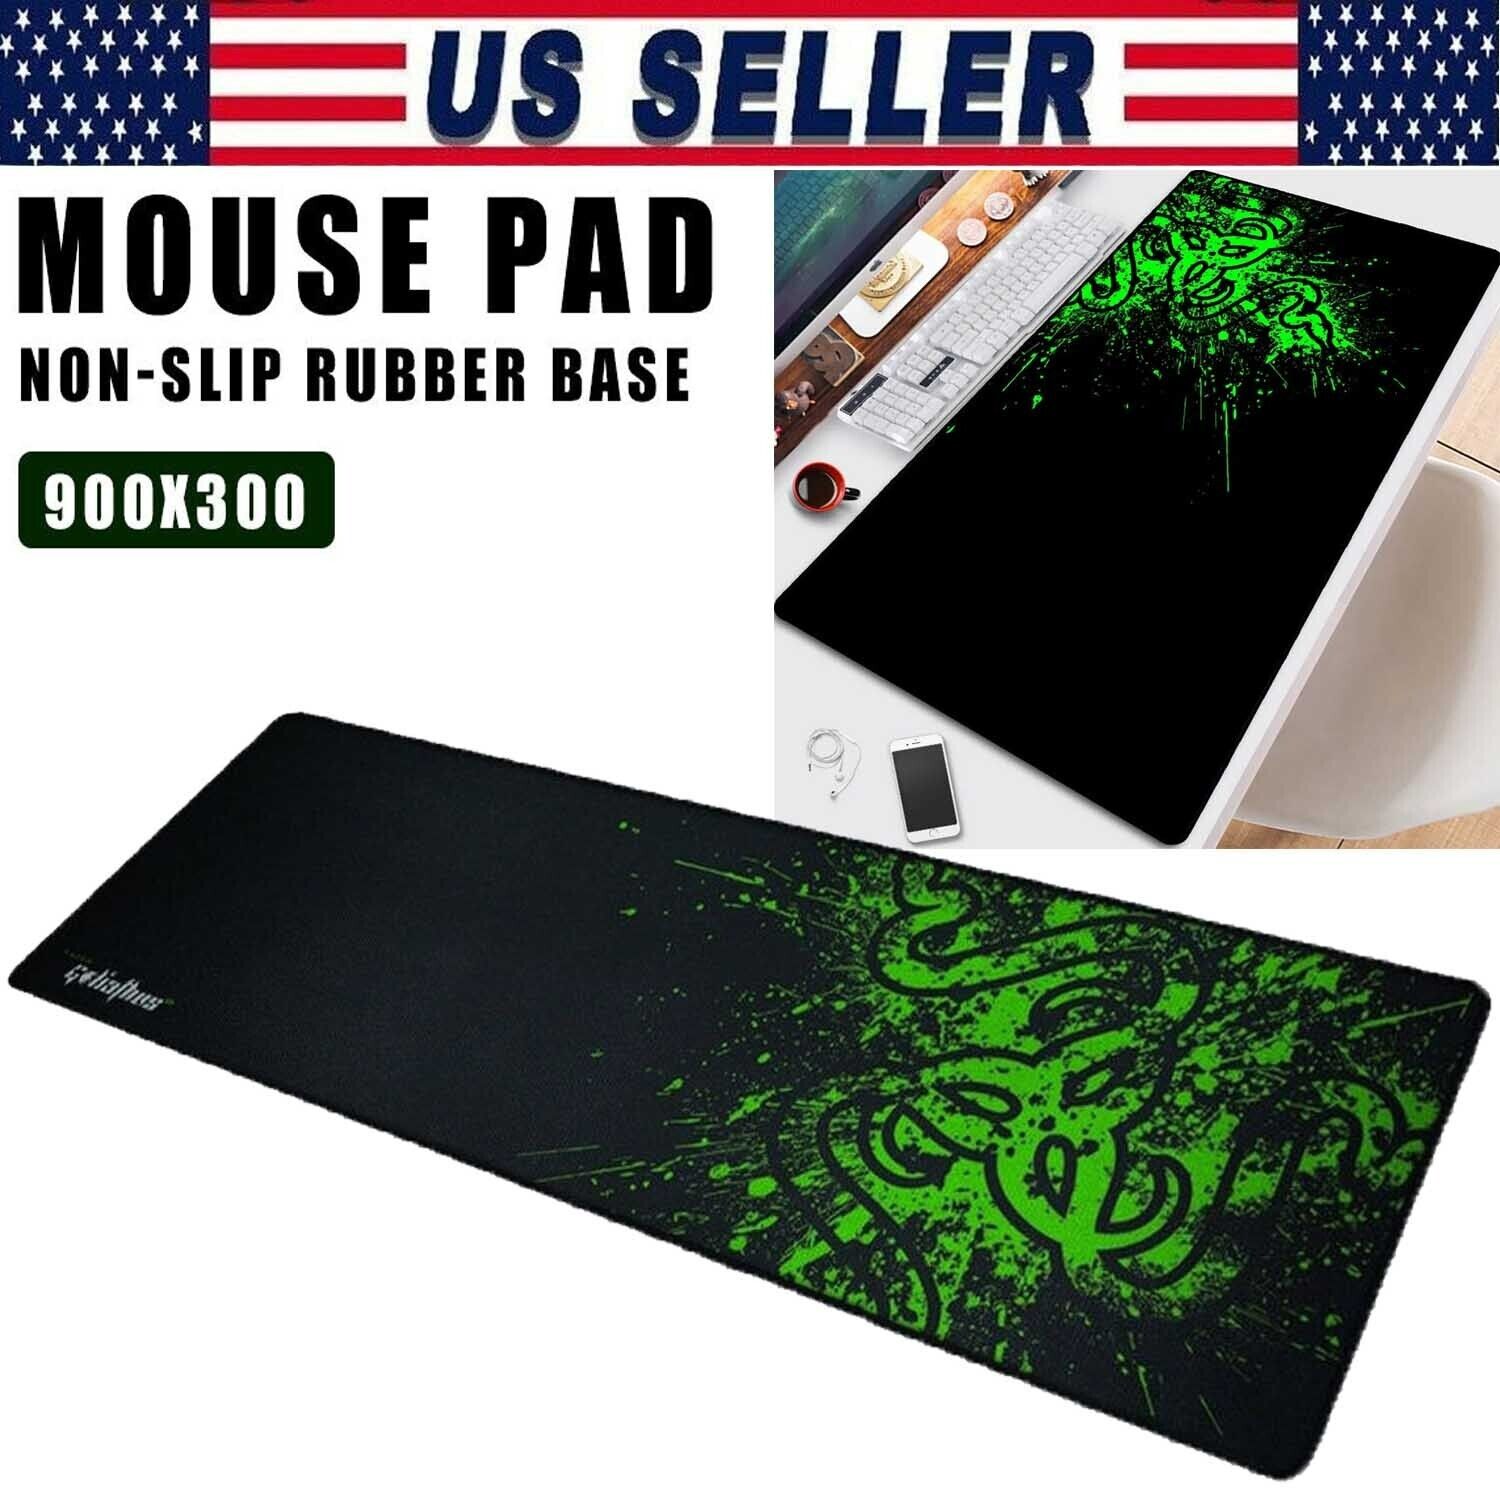 GAMING KEYBOARD MOUSE PAD EXTRA LARGE XL 90CM x 30CM MAT FOR PC LAPTOP MACBOOK